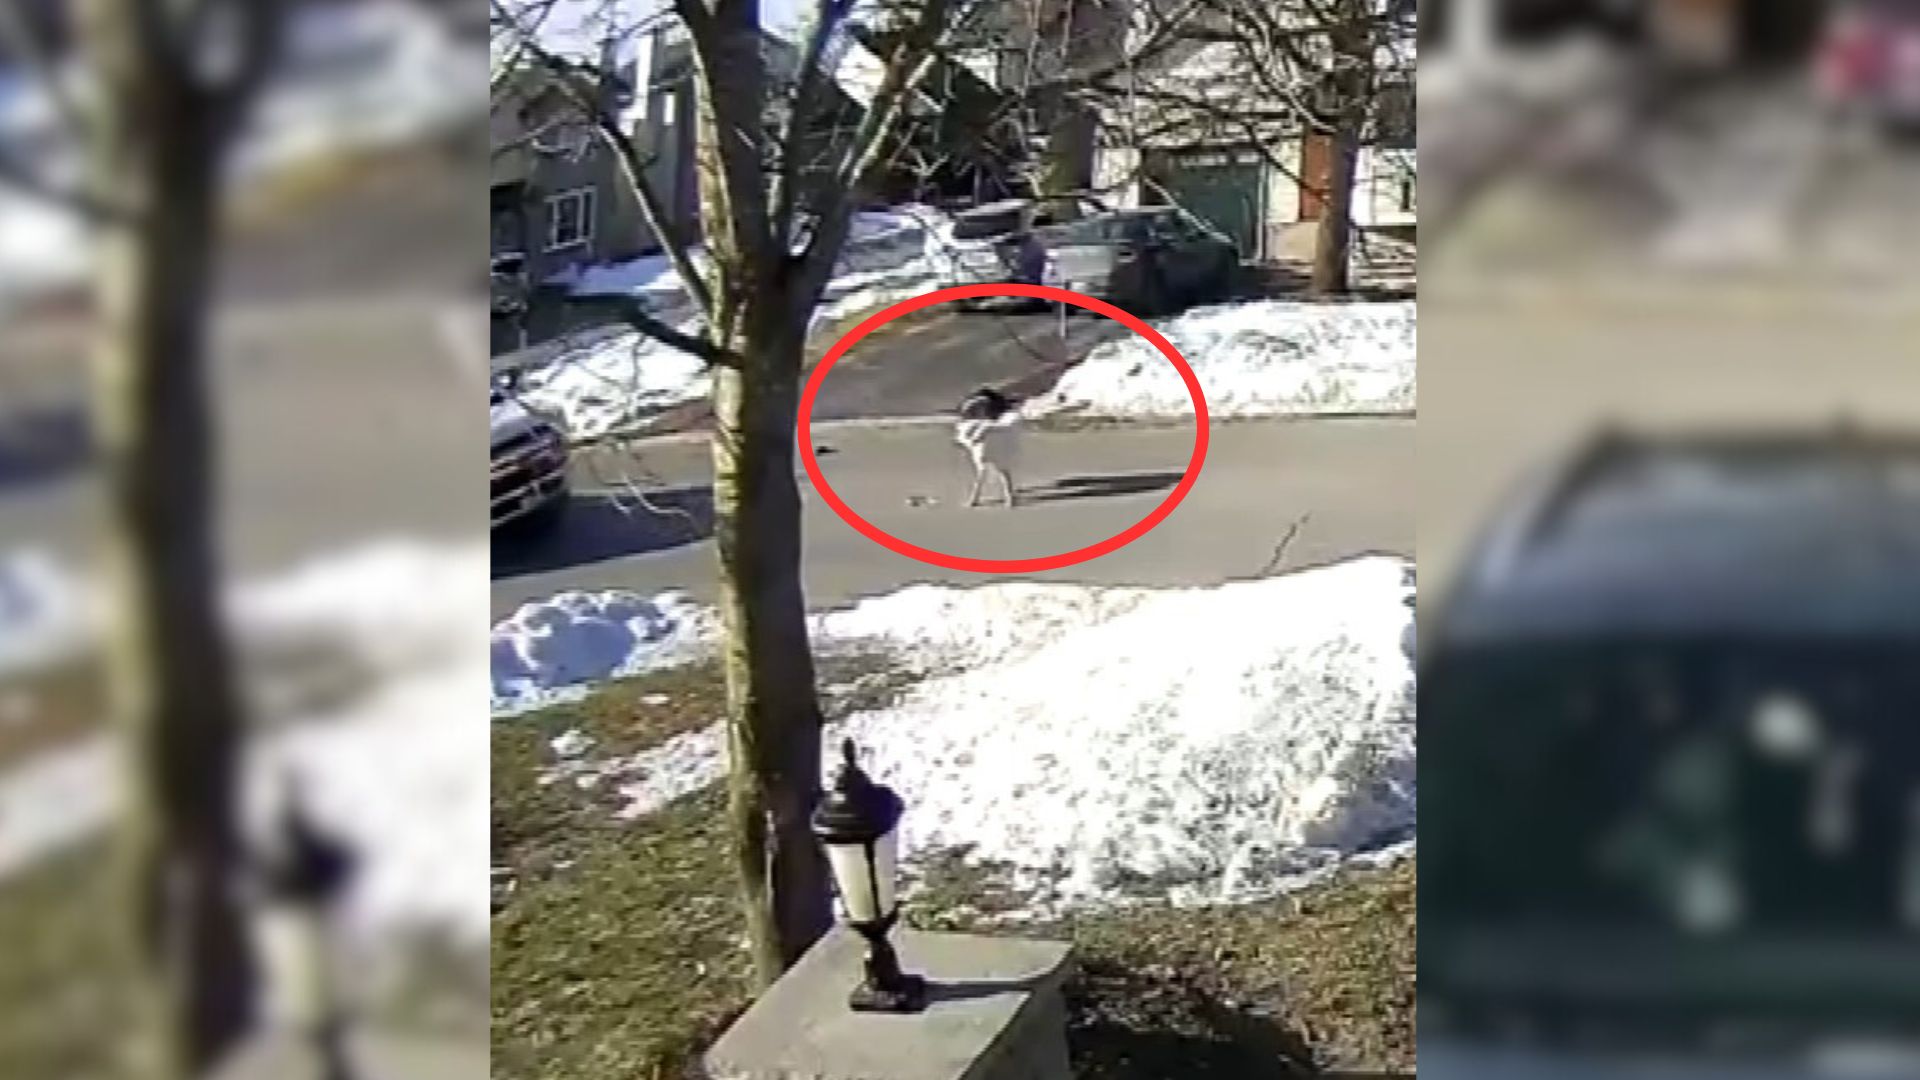 Brave Dog Stops A Stranger’s Car So They Could Help Save His Owner Who Suffered A Seizure